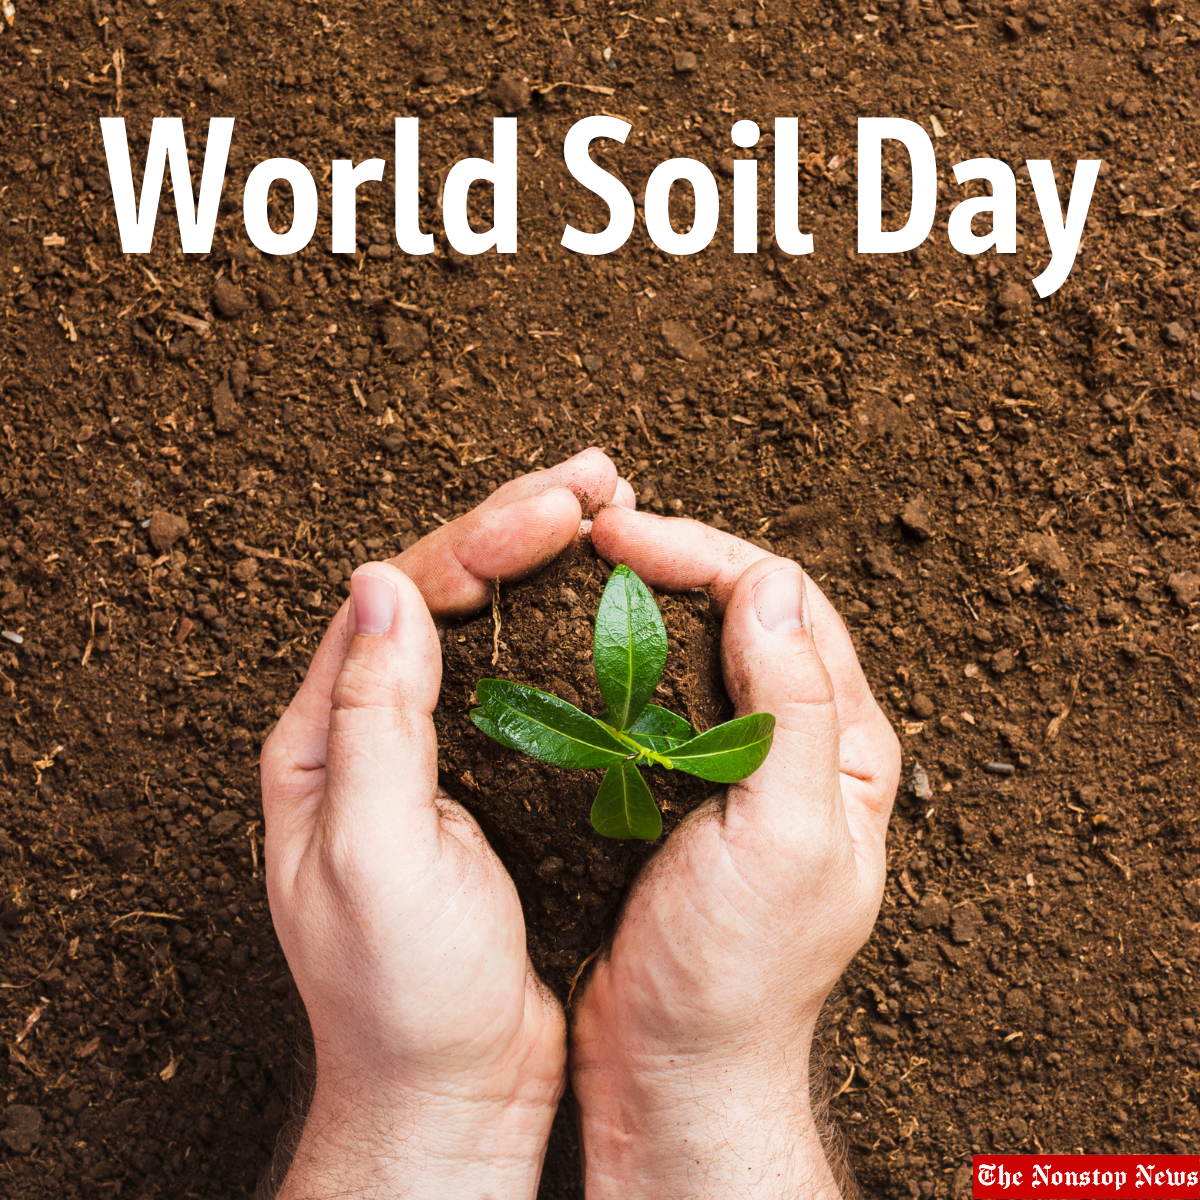 World Soil Day 2022 Current Theme, HD Images, Messages, Posters, Banners, Quotes, Wishes, Greetings, and Slogans